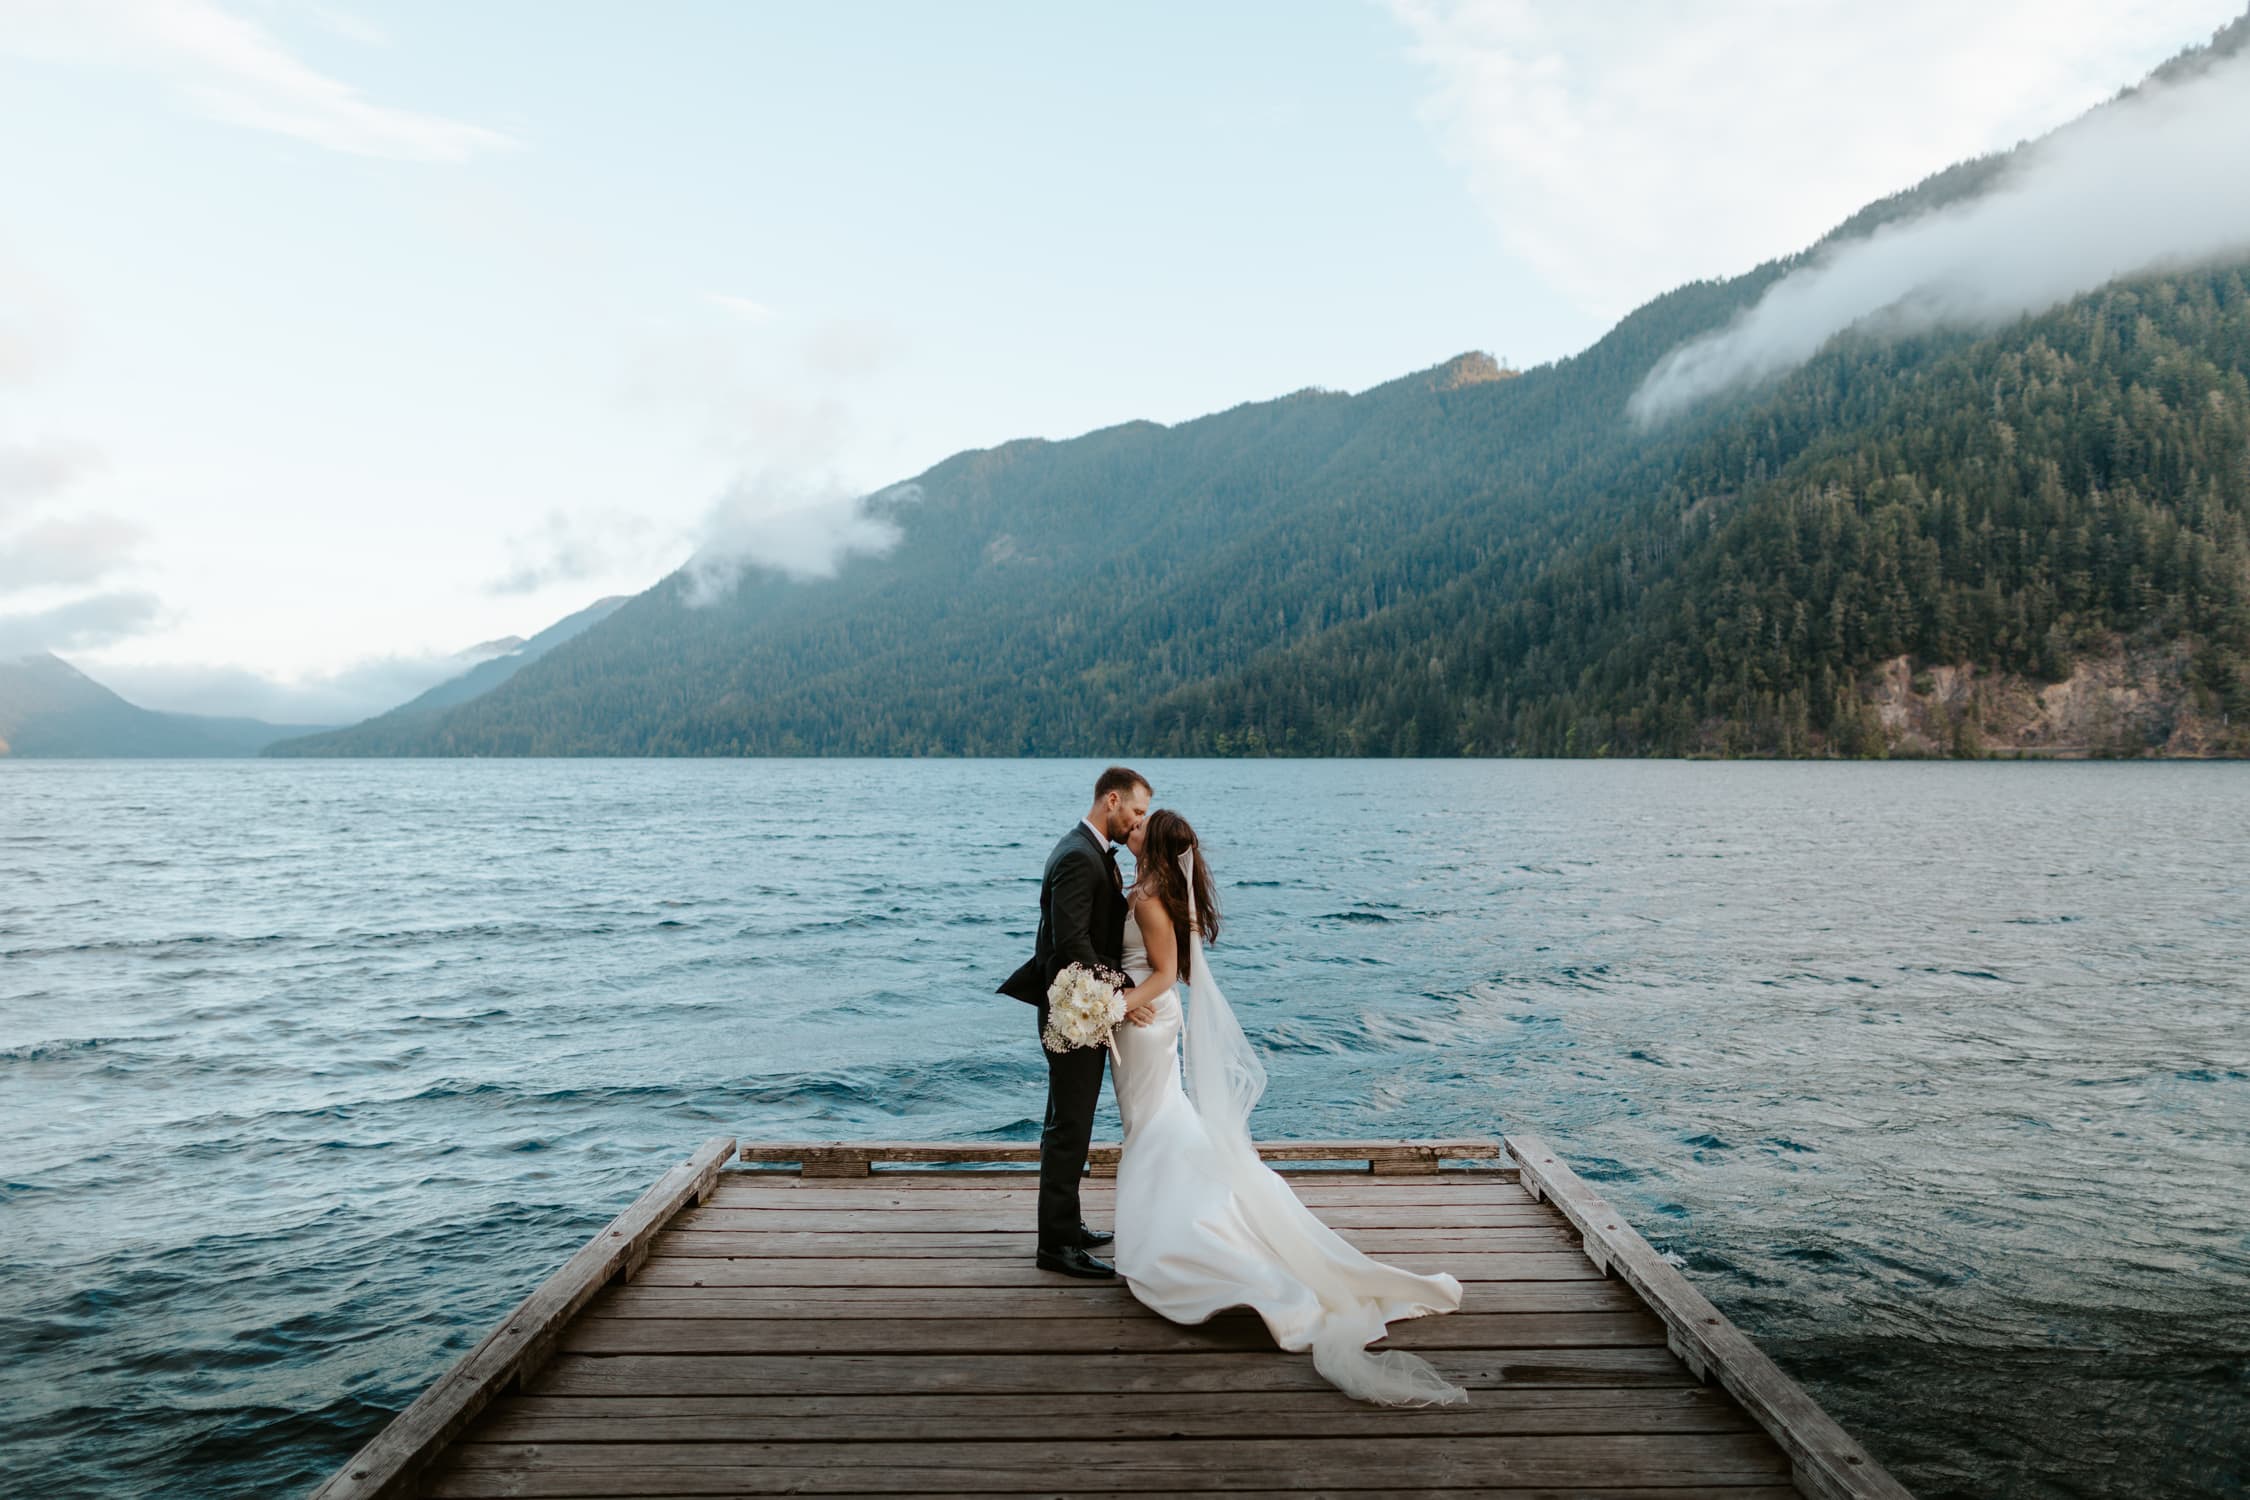 A bride and groom kissing on a dock on Lake Crescent, a blue lake in Olympic National Park.